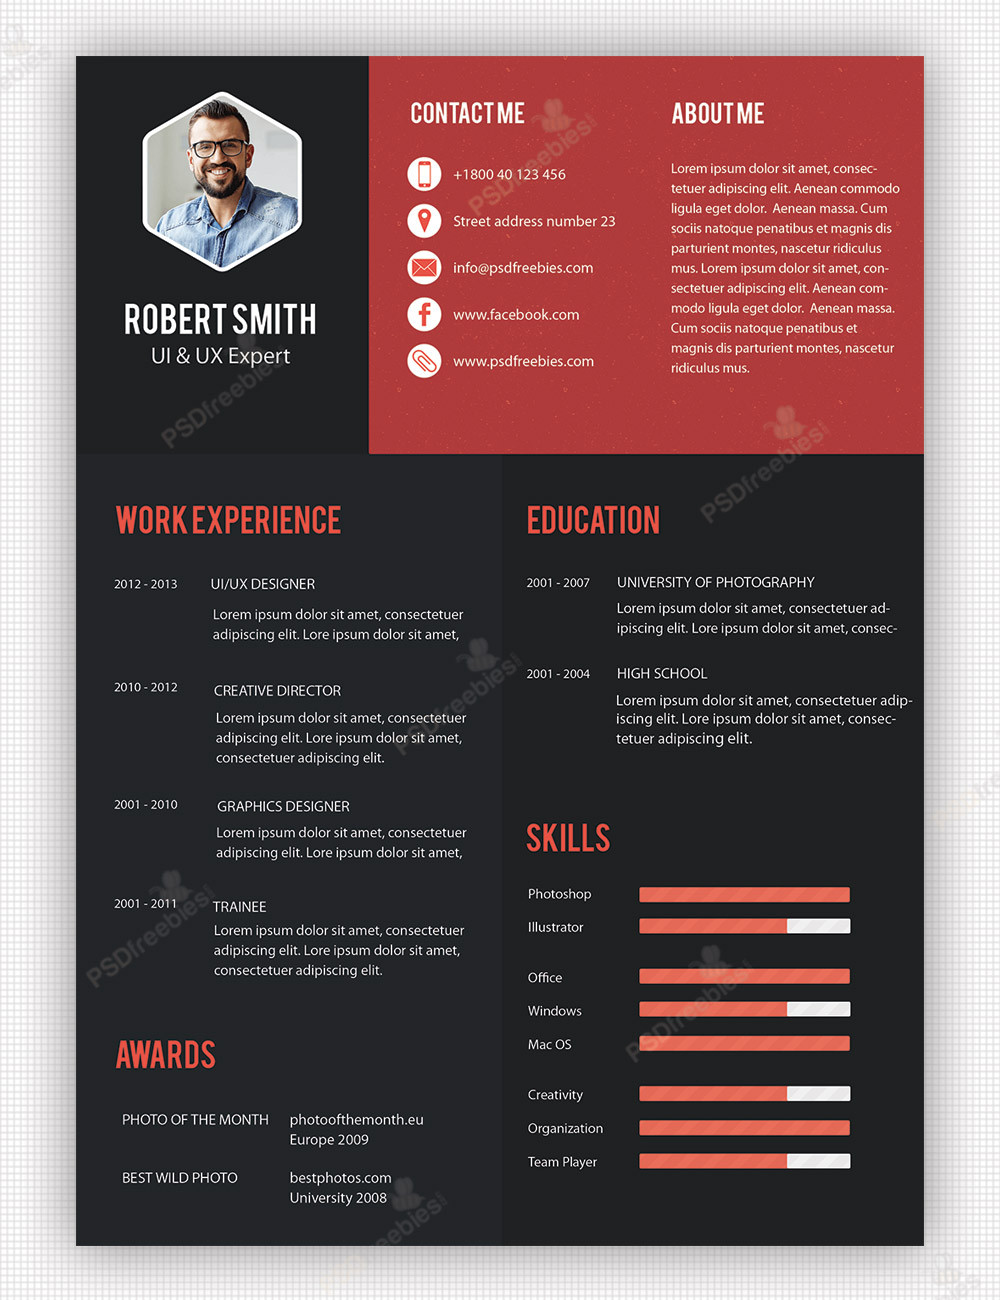 Resume Templates Free Download for Experienced Professionals Creative Professional Resume Template Free Psd â Psdfreebies.com